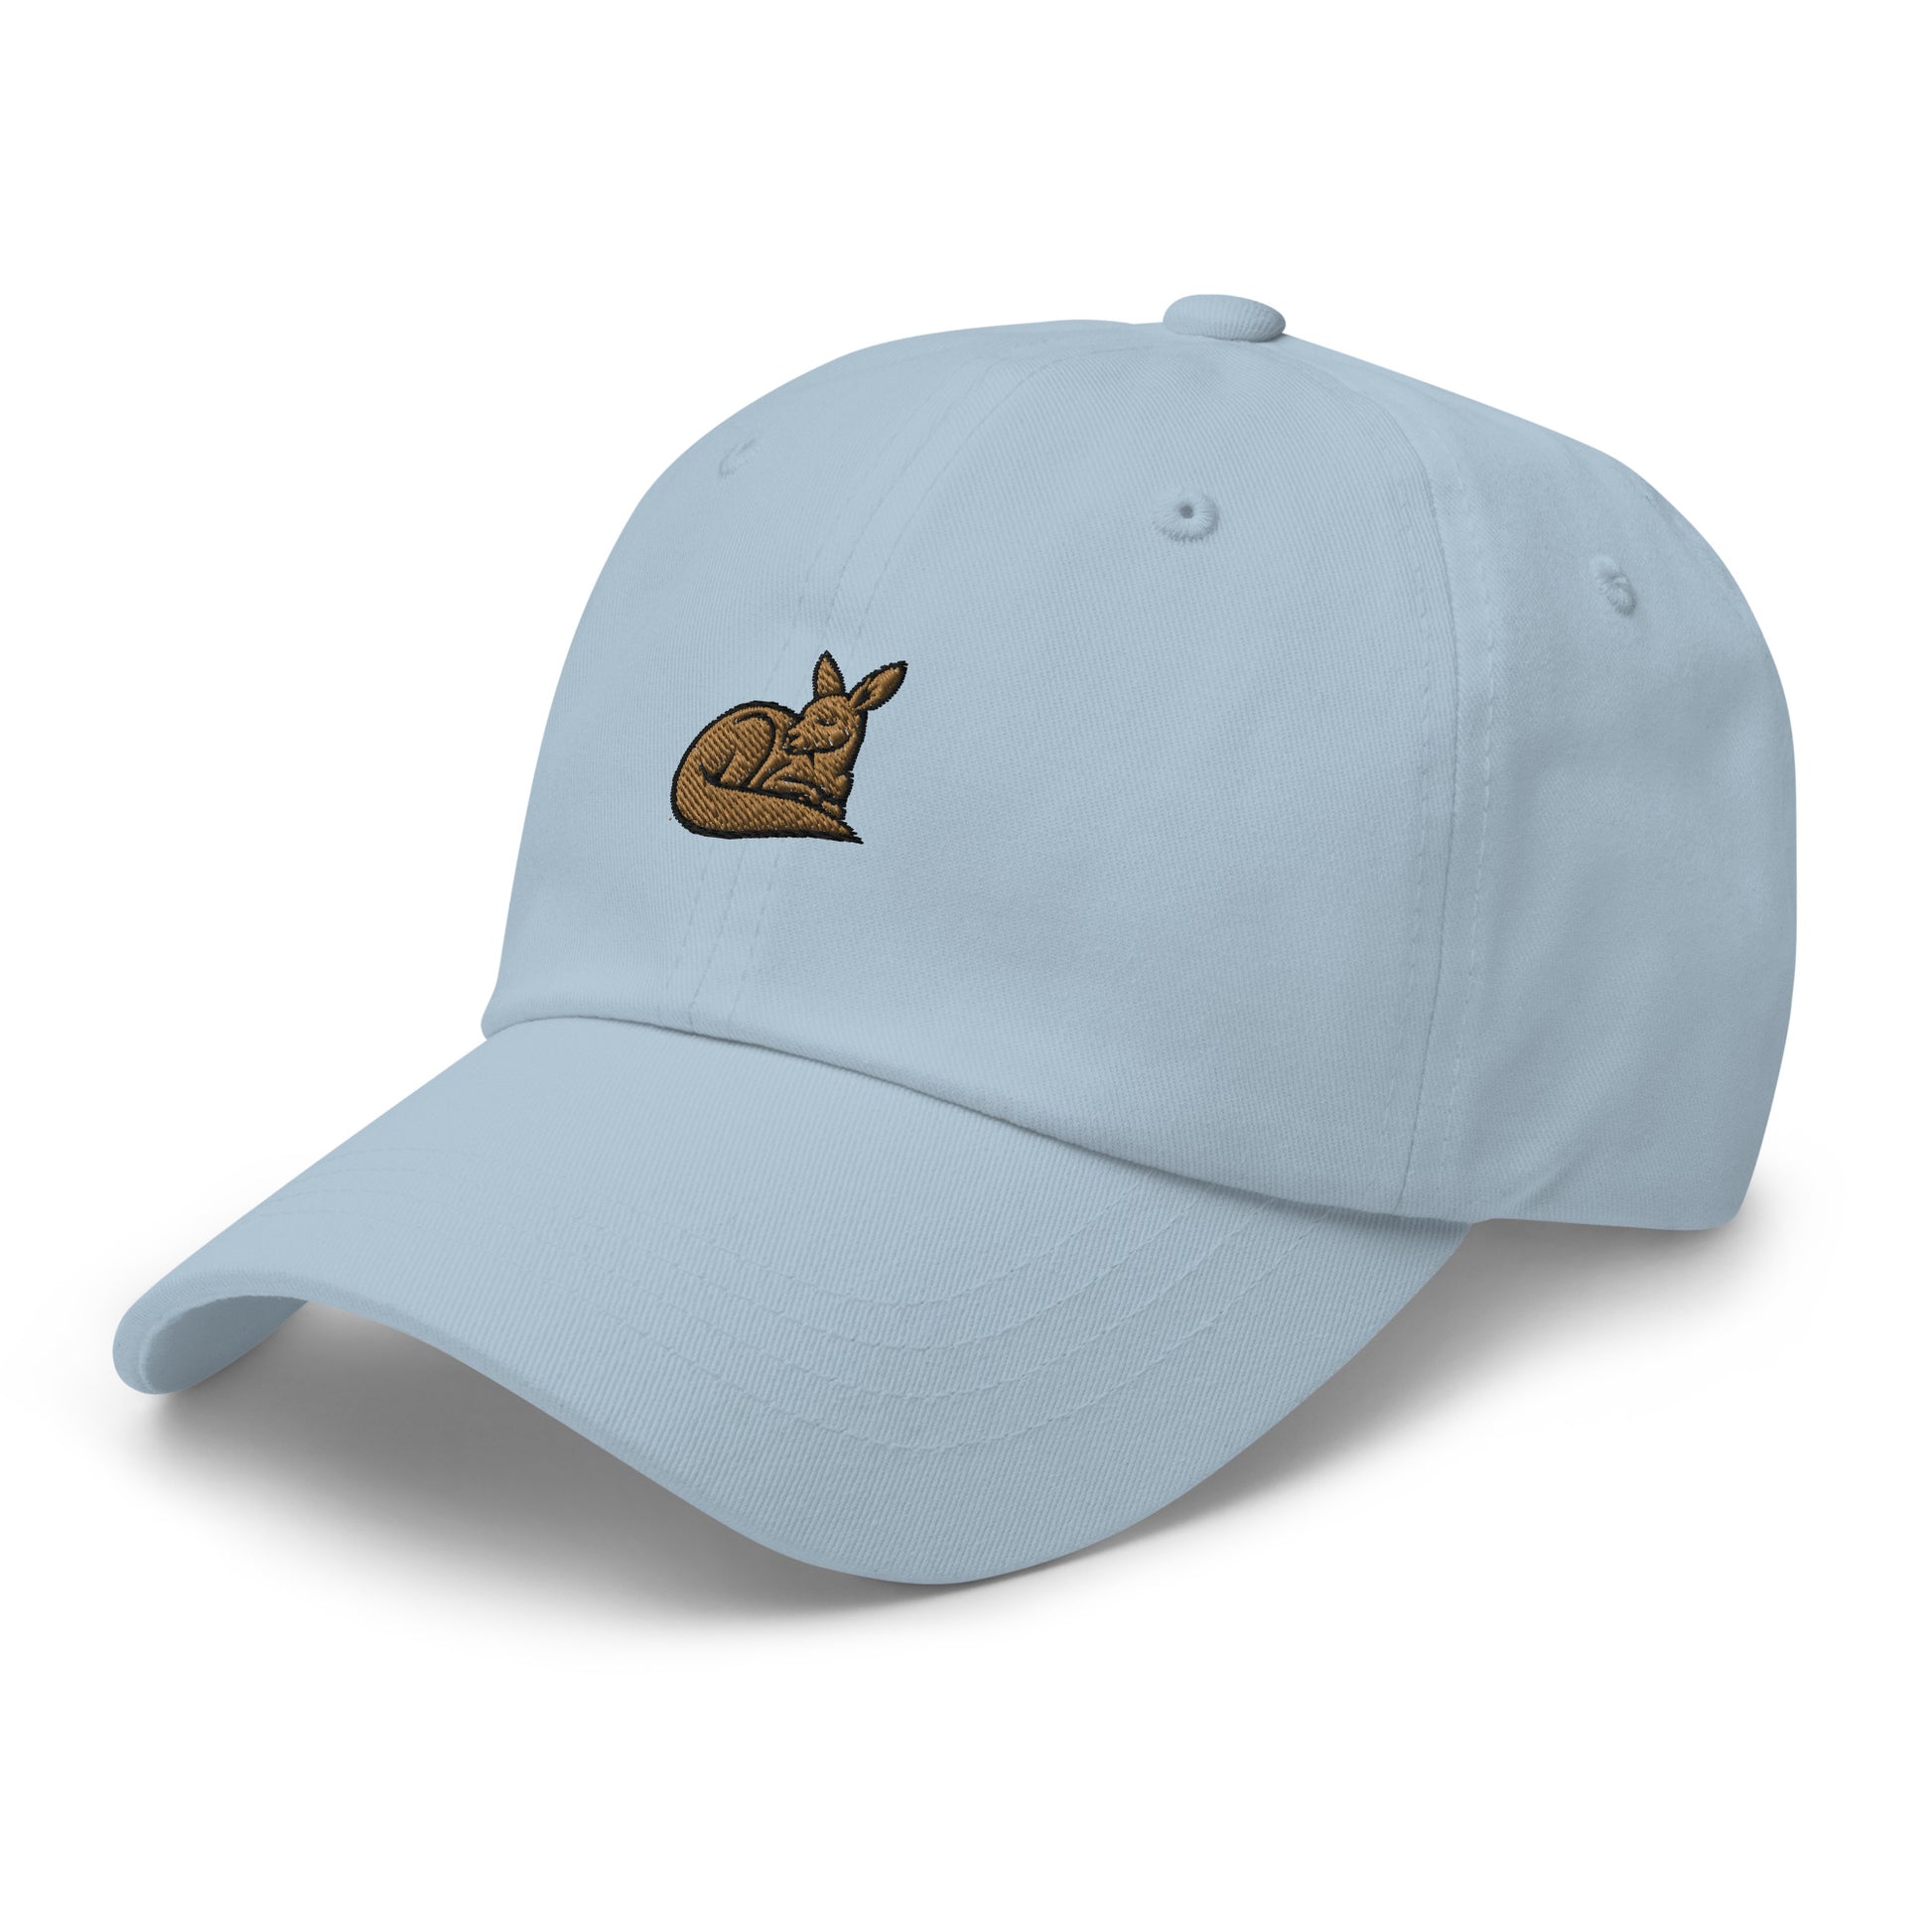 cap-from-the-front-with-kangaroo-symbol